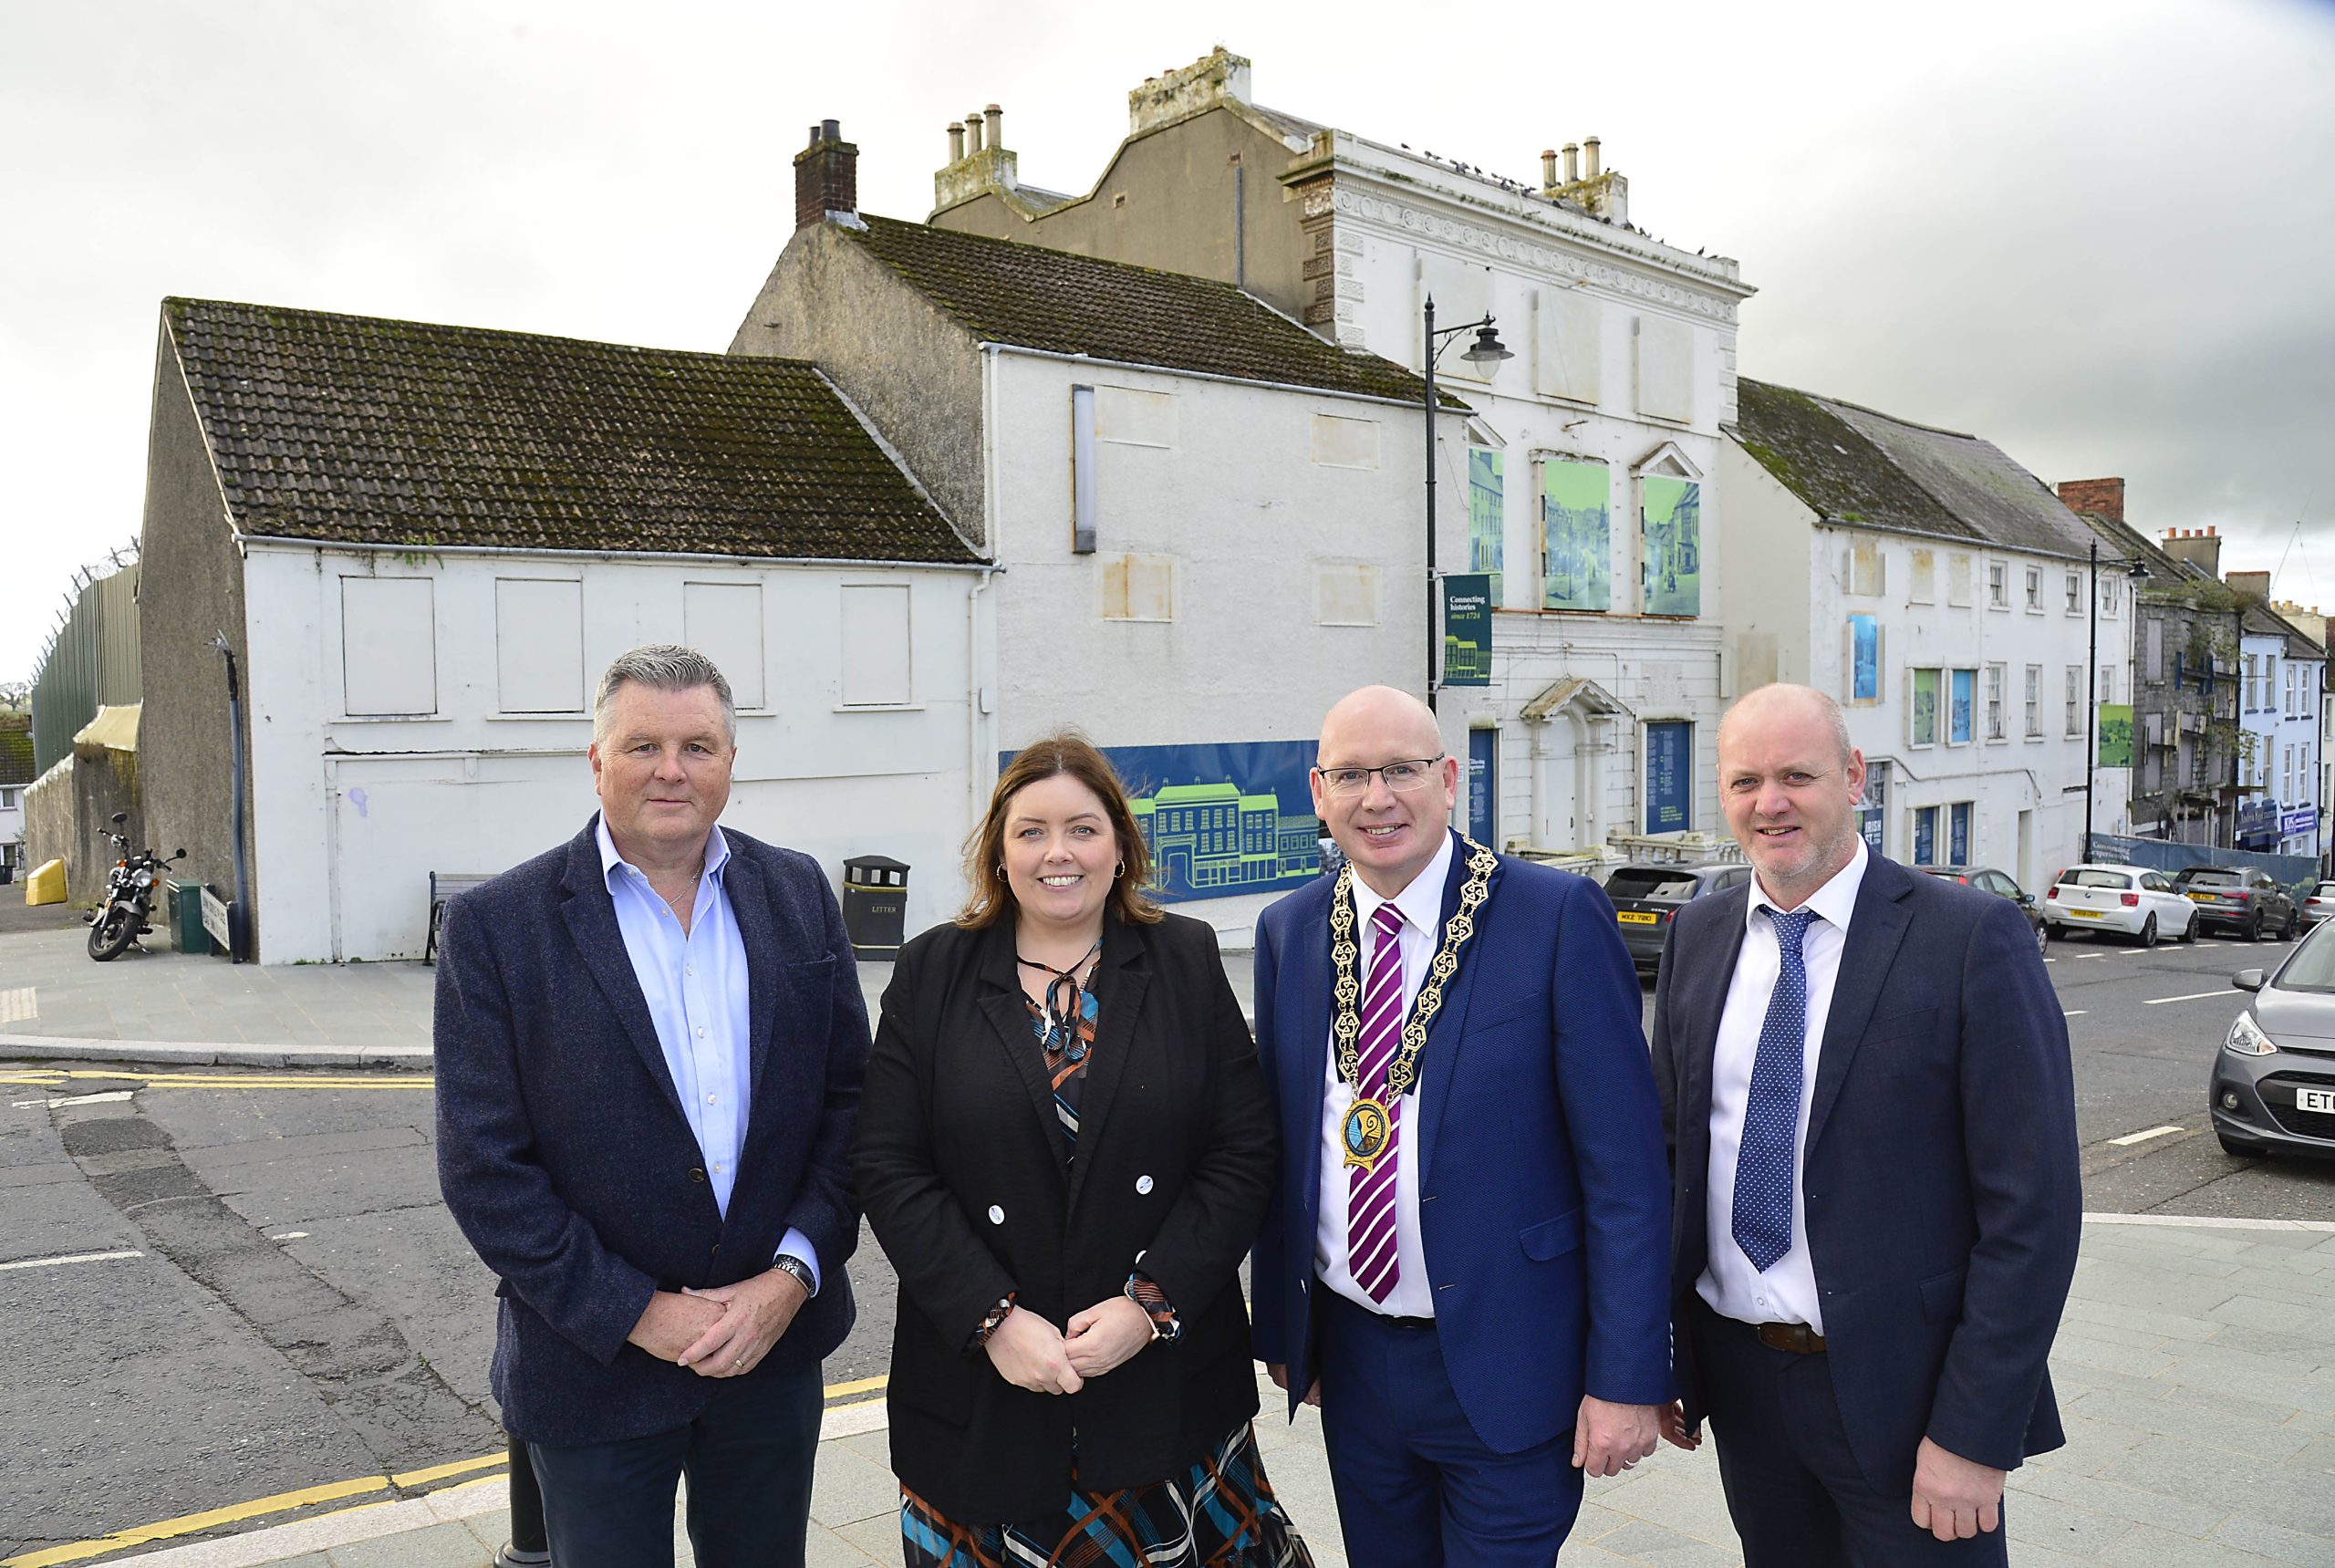 Tender process opens for the re-development of major site in Downpatrick